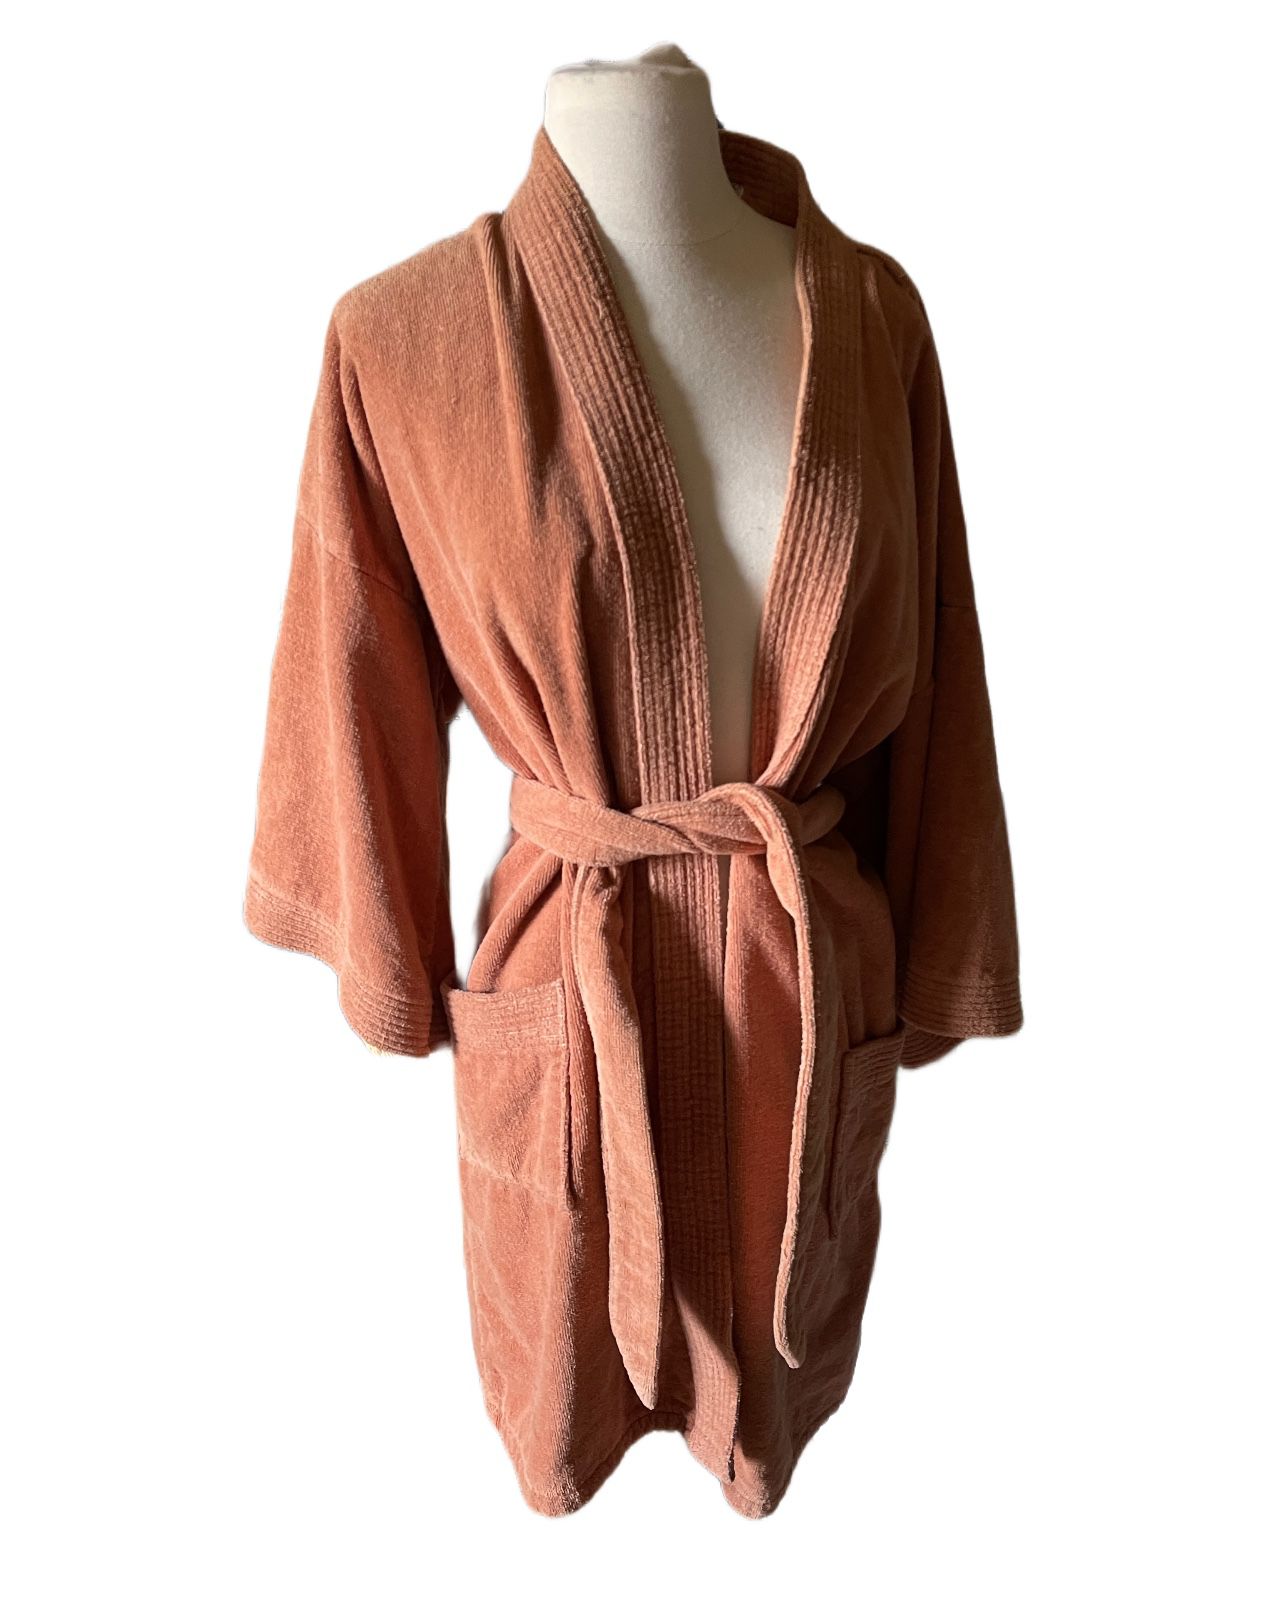 Vintage RARE  1970's  Robe-Martex Terry Velour by Sea Island ONE SIZE  Rust color  Unisex